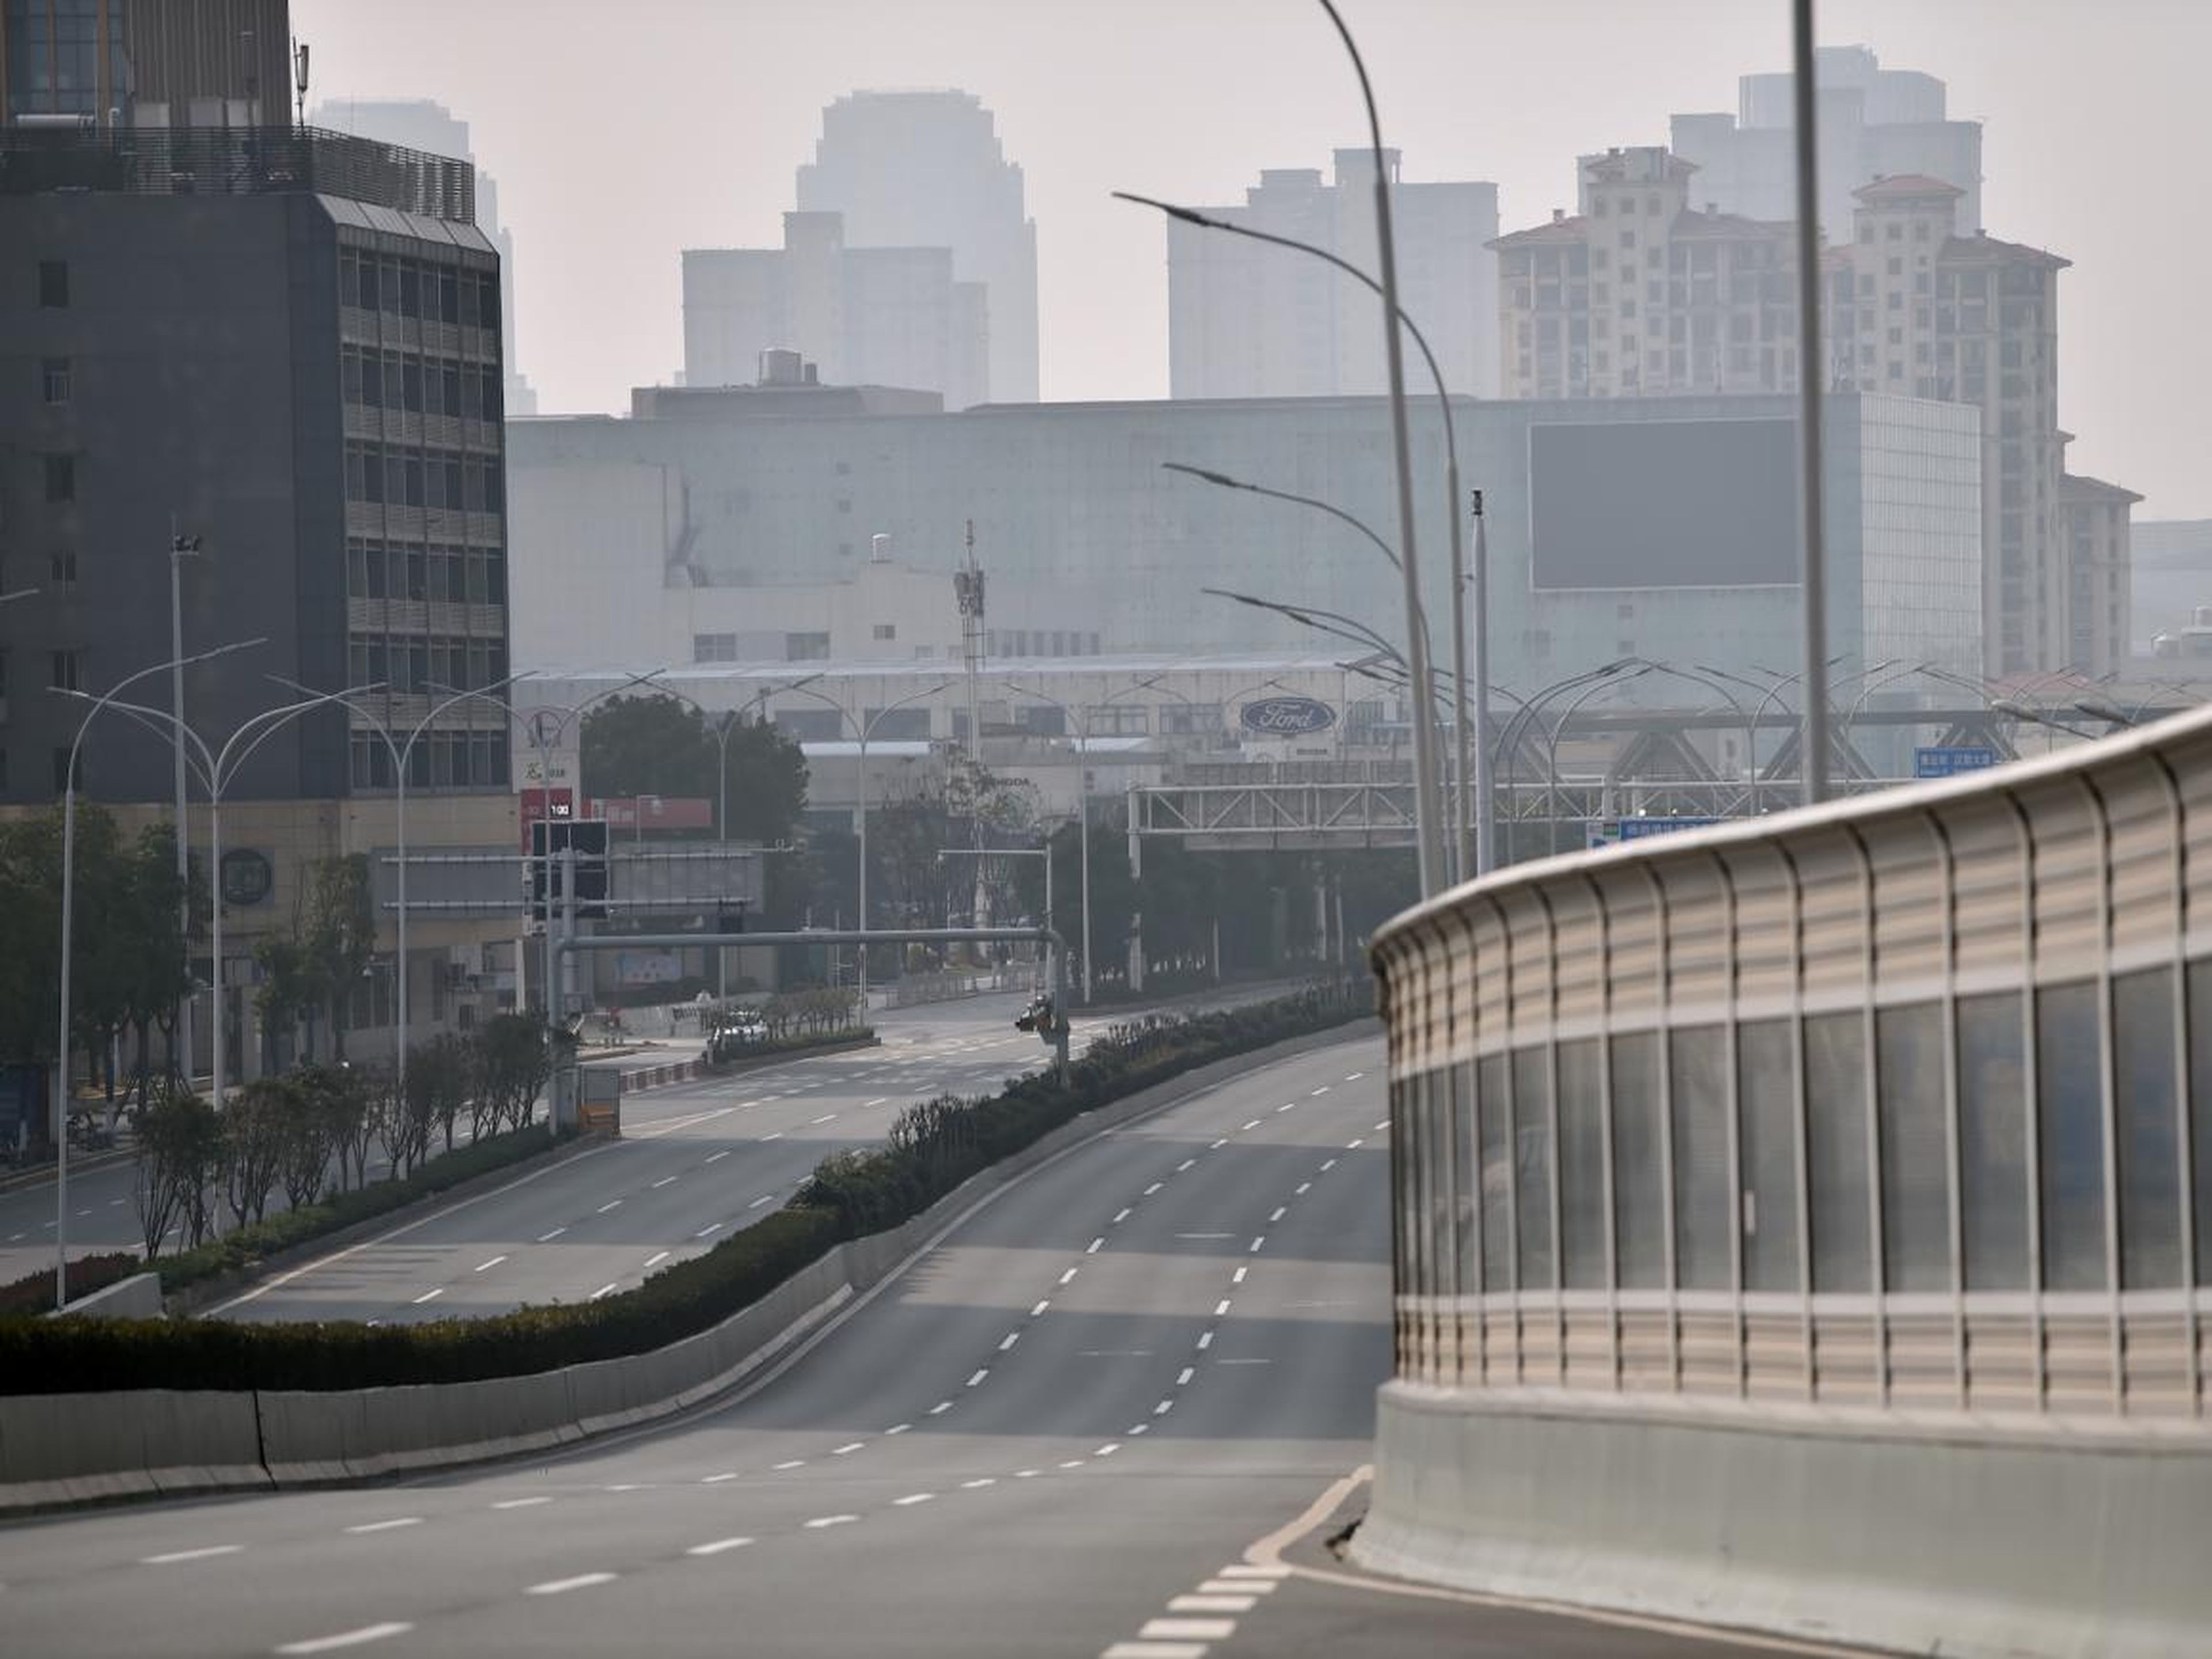 A major road going through the streets of the city remains deserted as people stay at home and avoid transport due to the virus outbreak in the city of Wuhan in Hubei province on January 29, 2020.